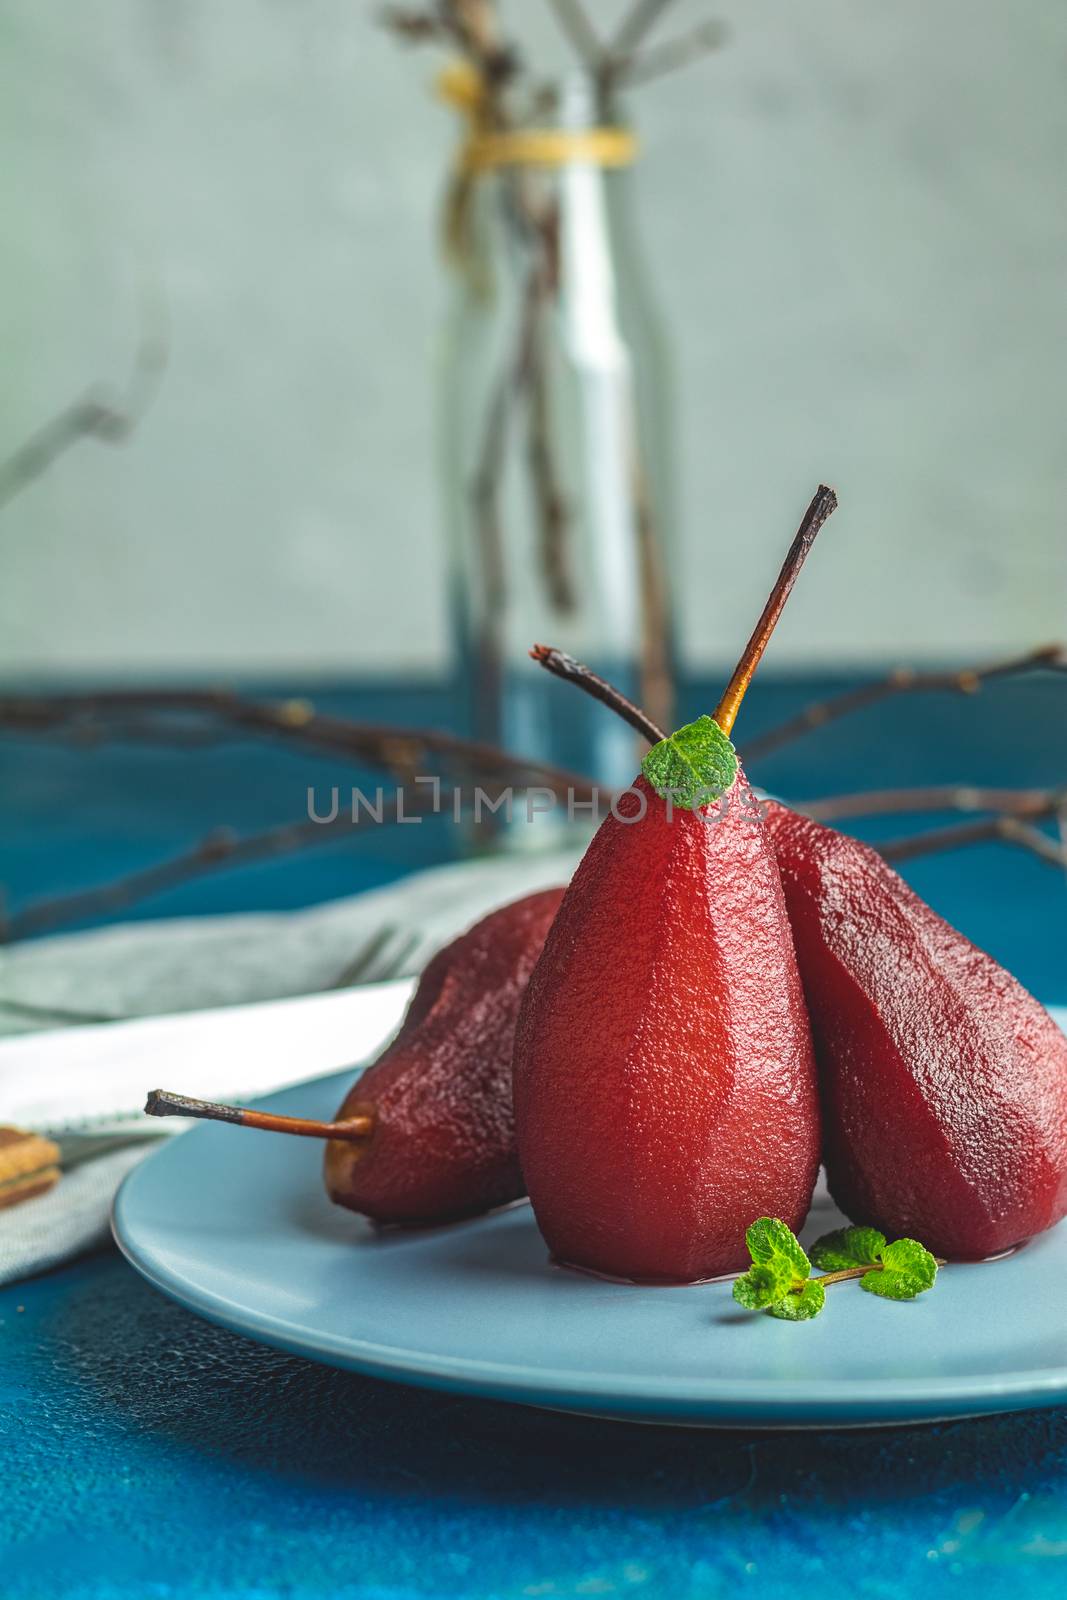 Pears stewed in red wine or pomegranate juice by ArtSvitlyna